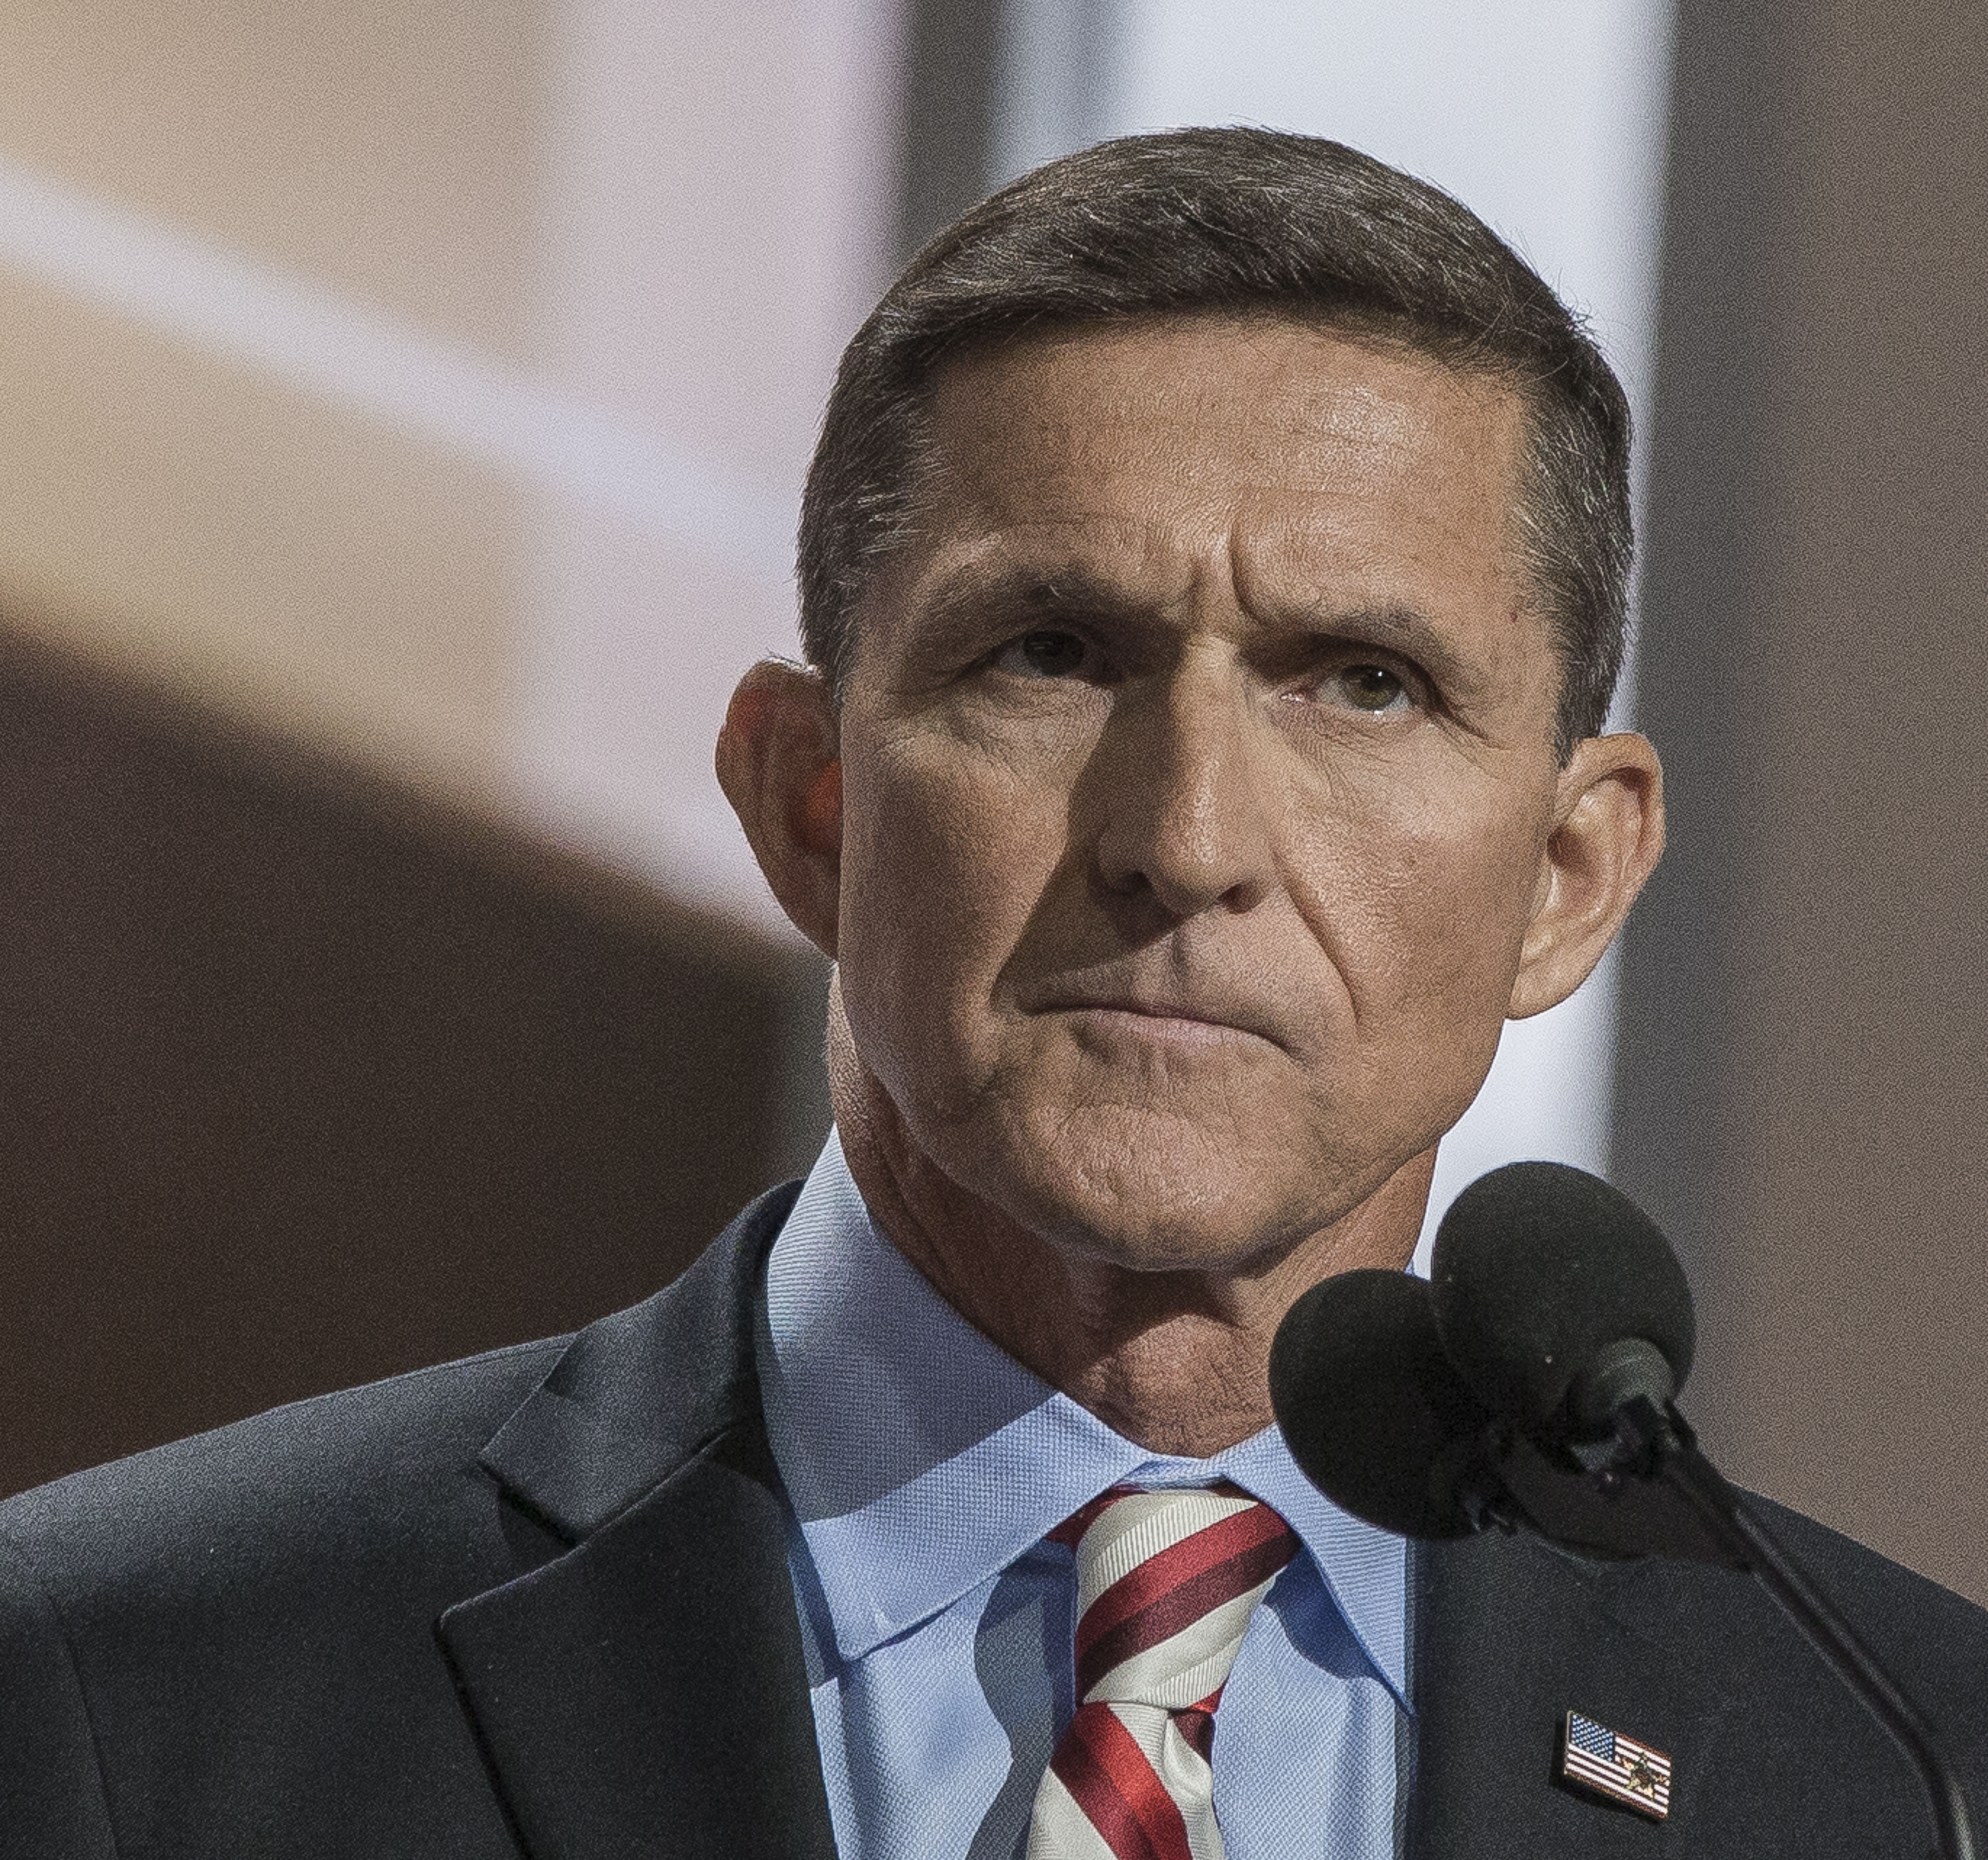 Mueller Charges Flynn With Lying to Investigators